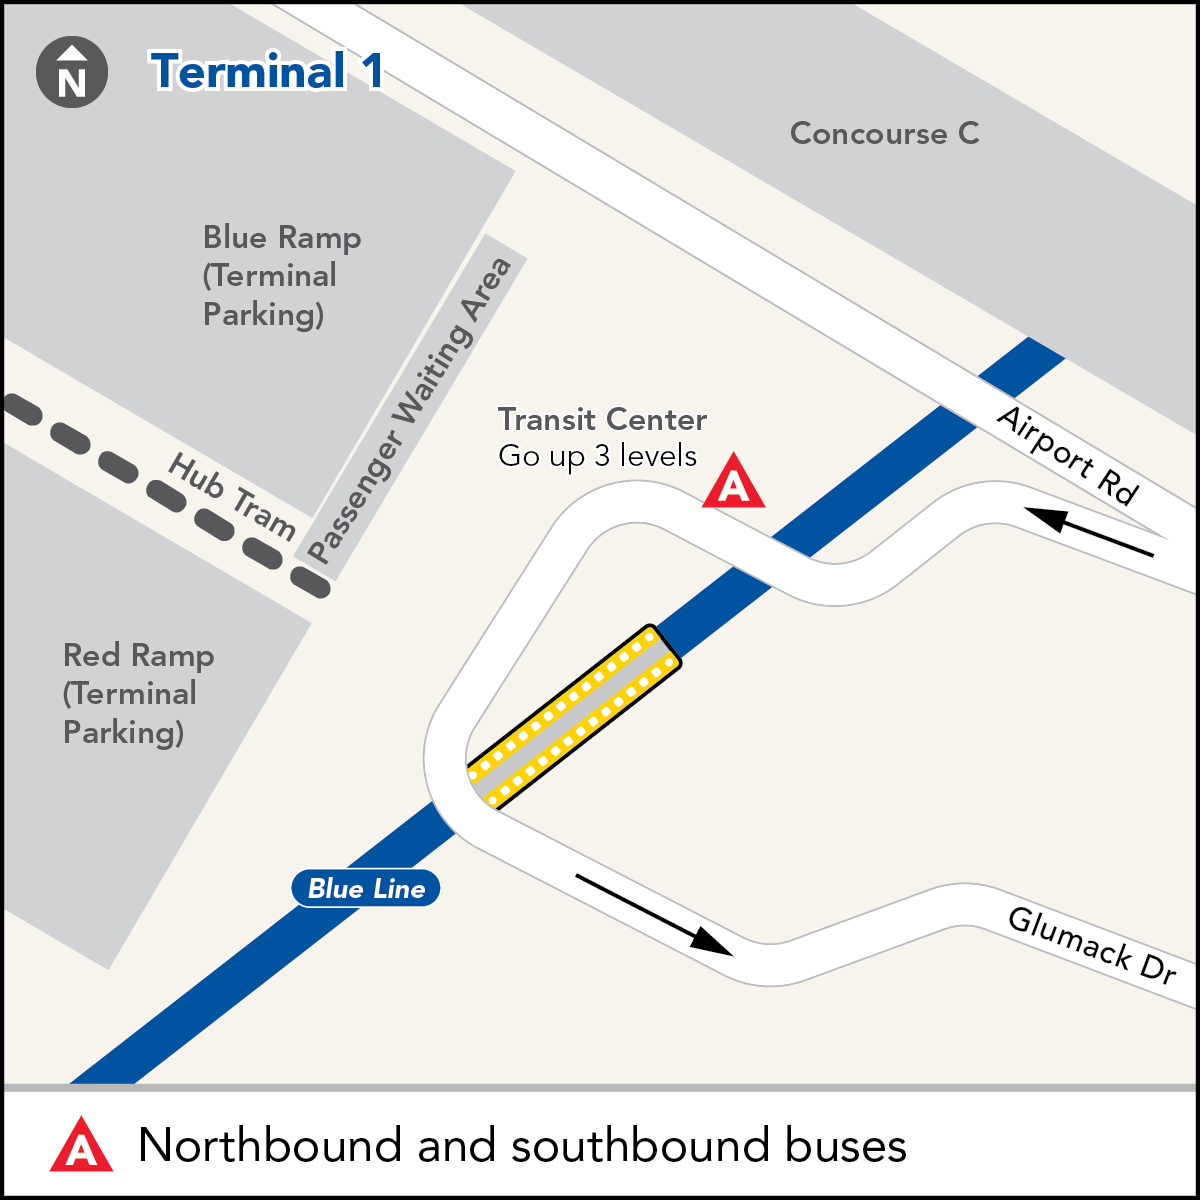 Board buses to Mall of America and Target Field at the Terminal 1 - Airport bus stop. From the Ground Transportation area, follow signs for the Gold Ramp. Go up two levels to the waiting area. Bus stop is located across the pedestrian crossing from the building (at the bus shelter).